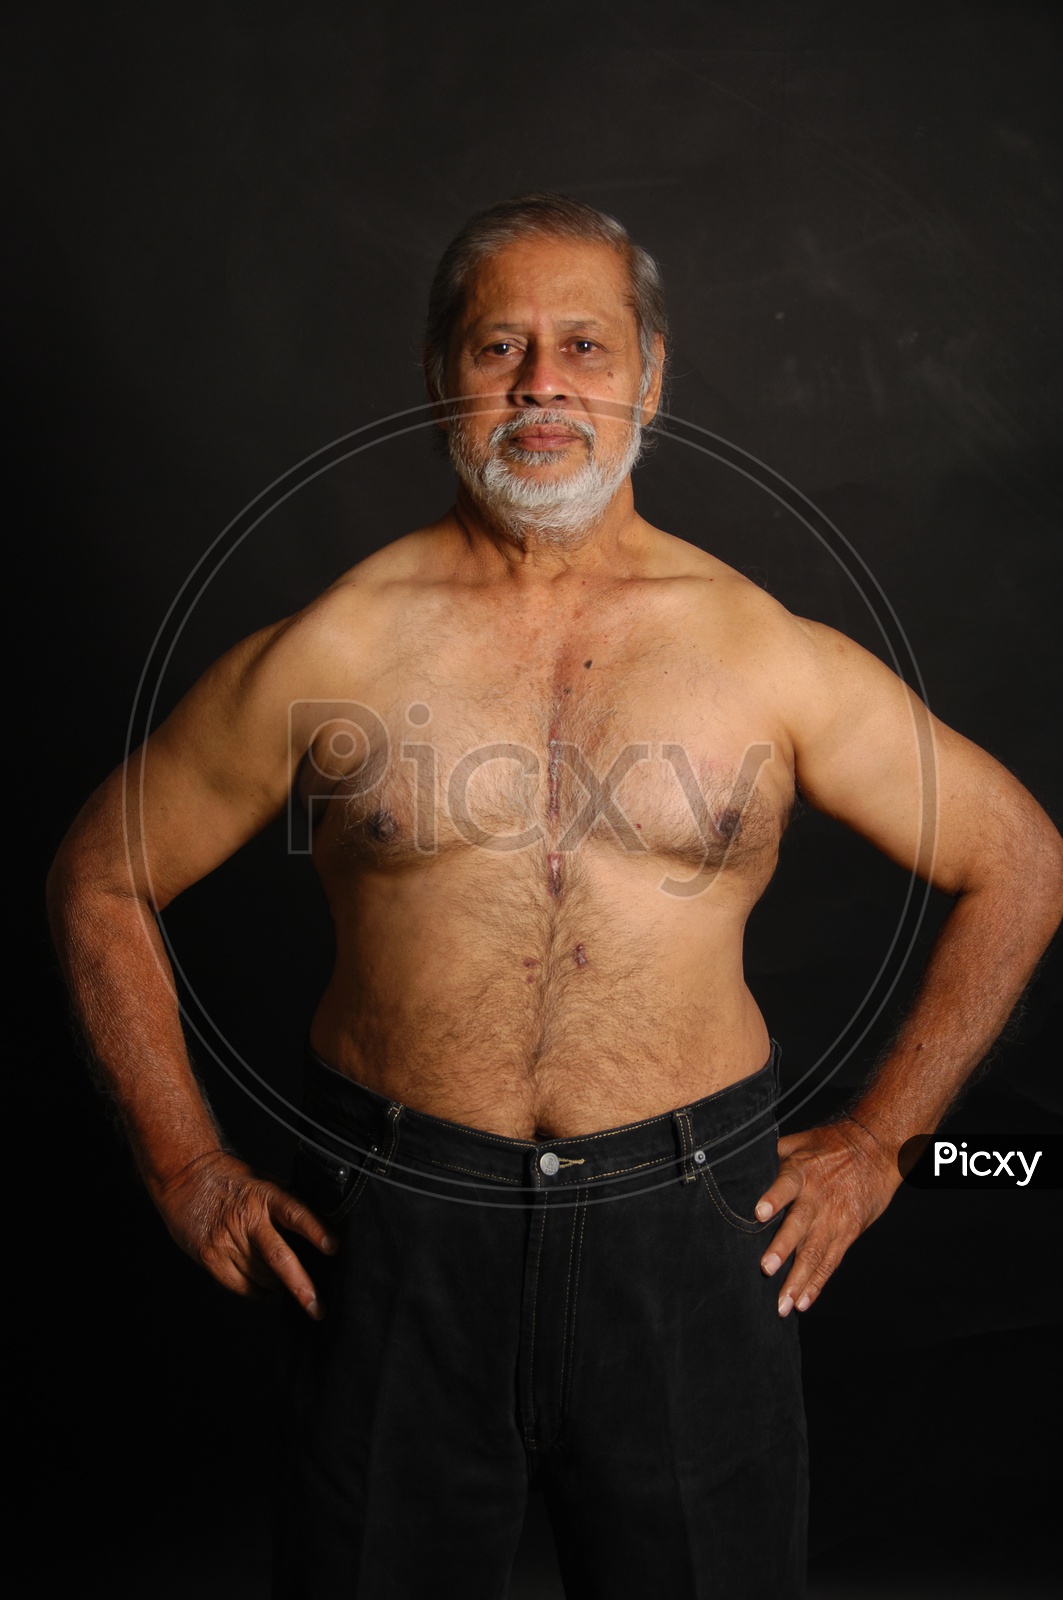 Photograph of a old man with studio lighting with black background / People Face